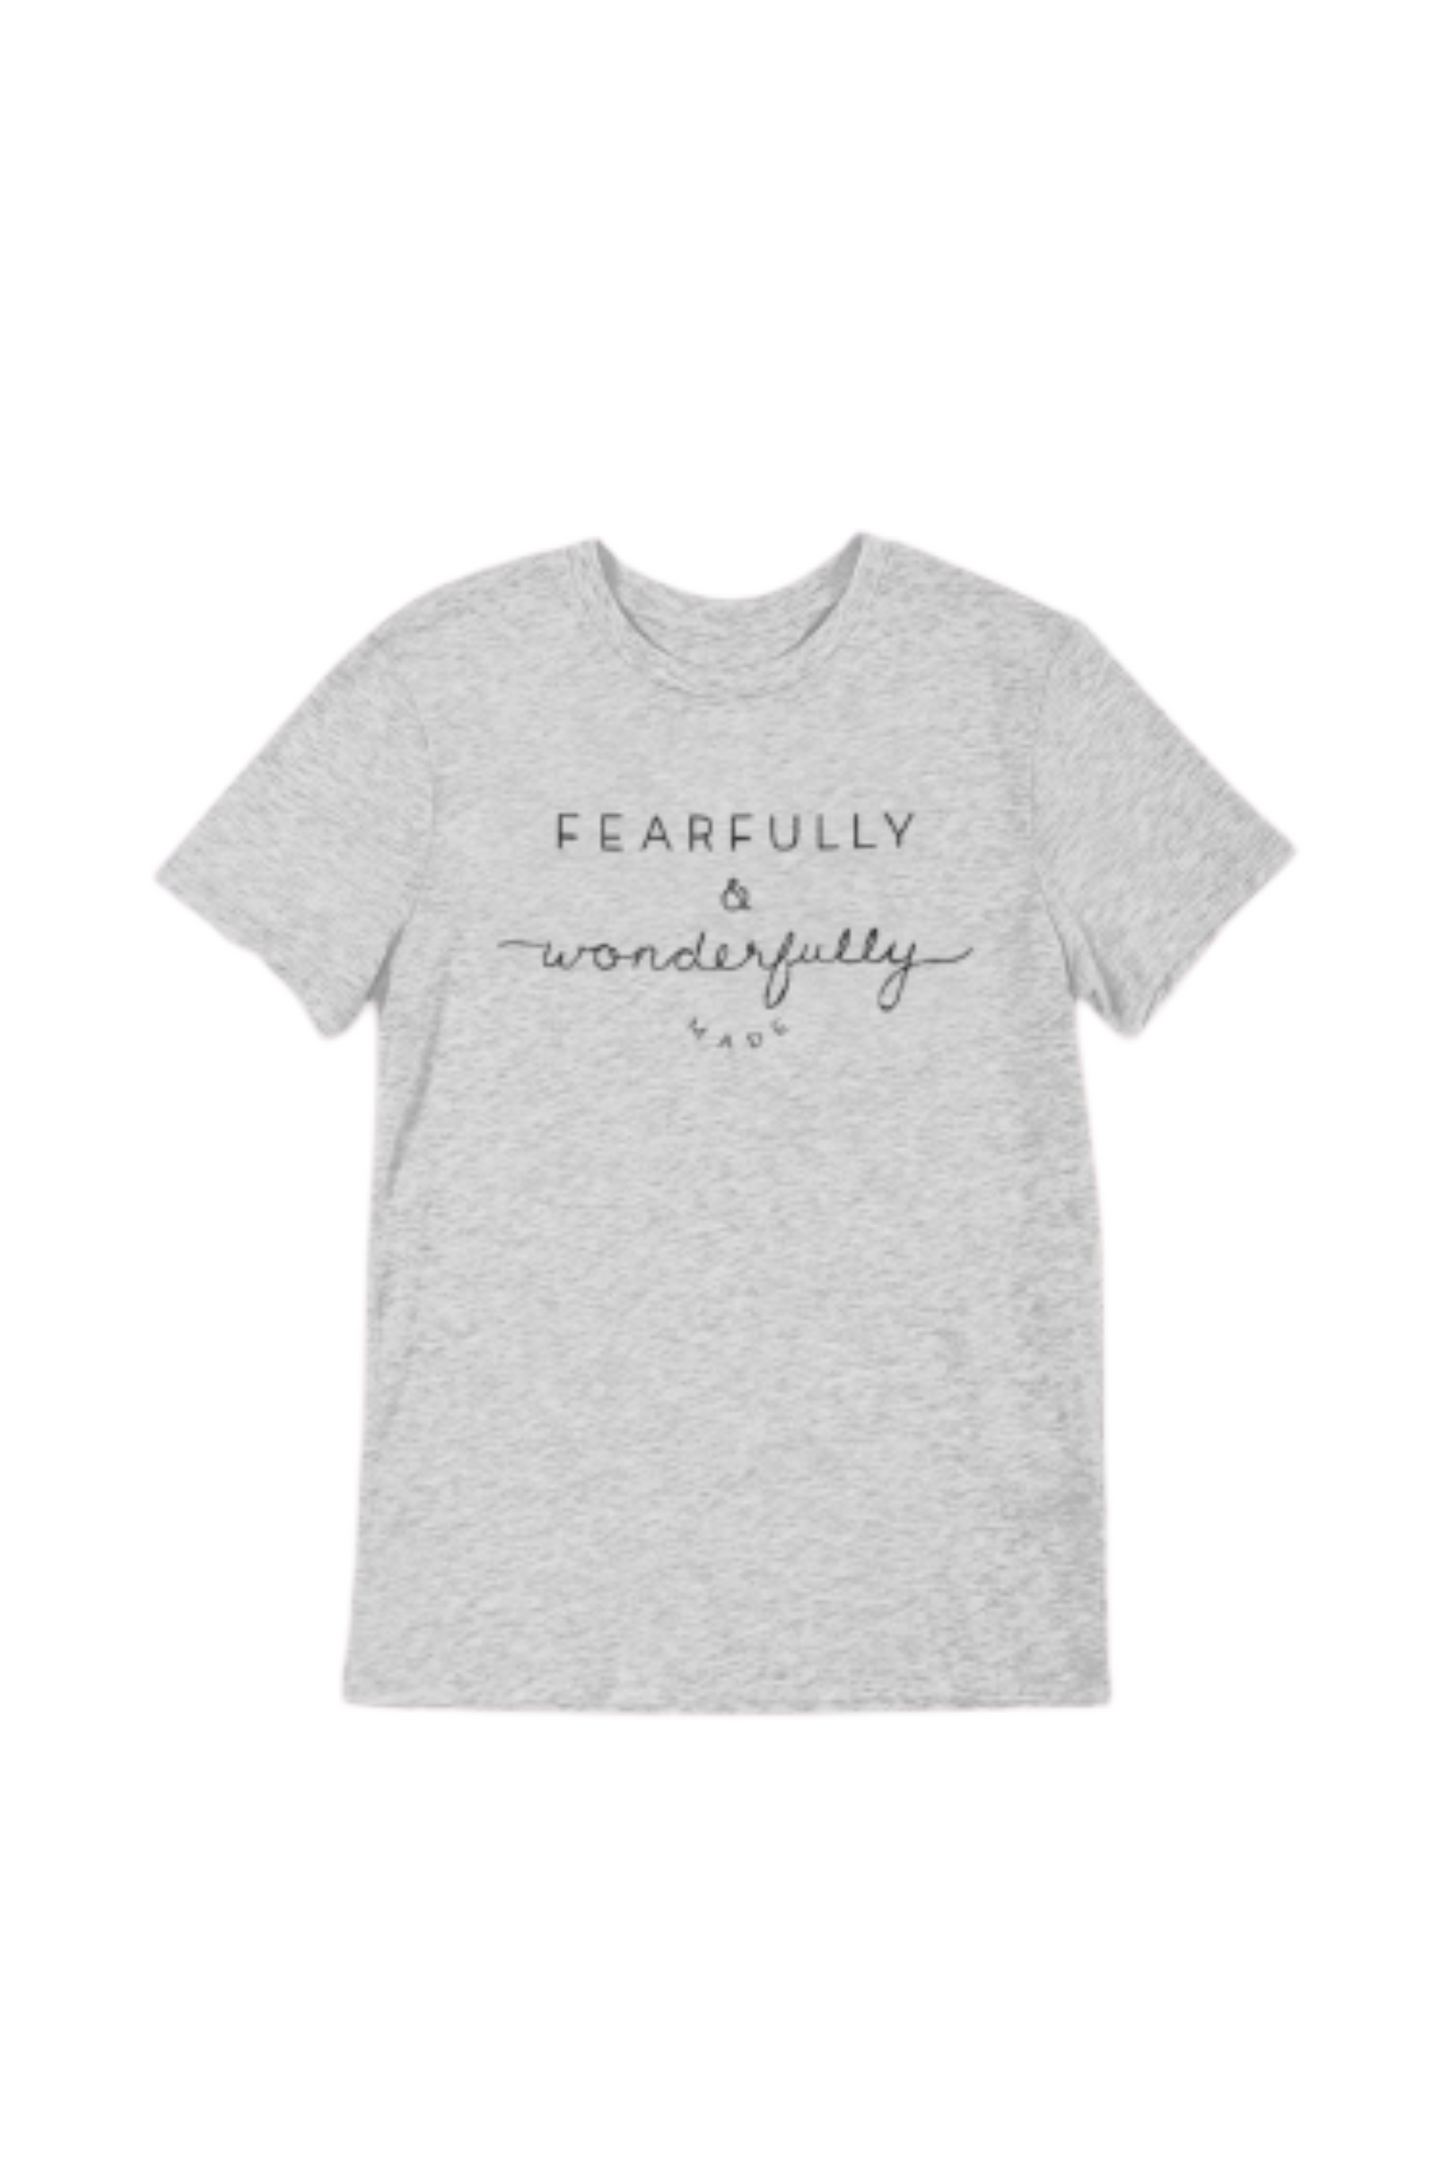 Fearfully and Wonderfully Made Heather Grey T-Shirt